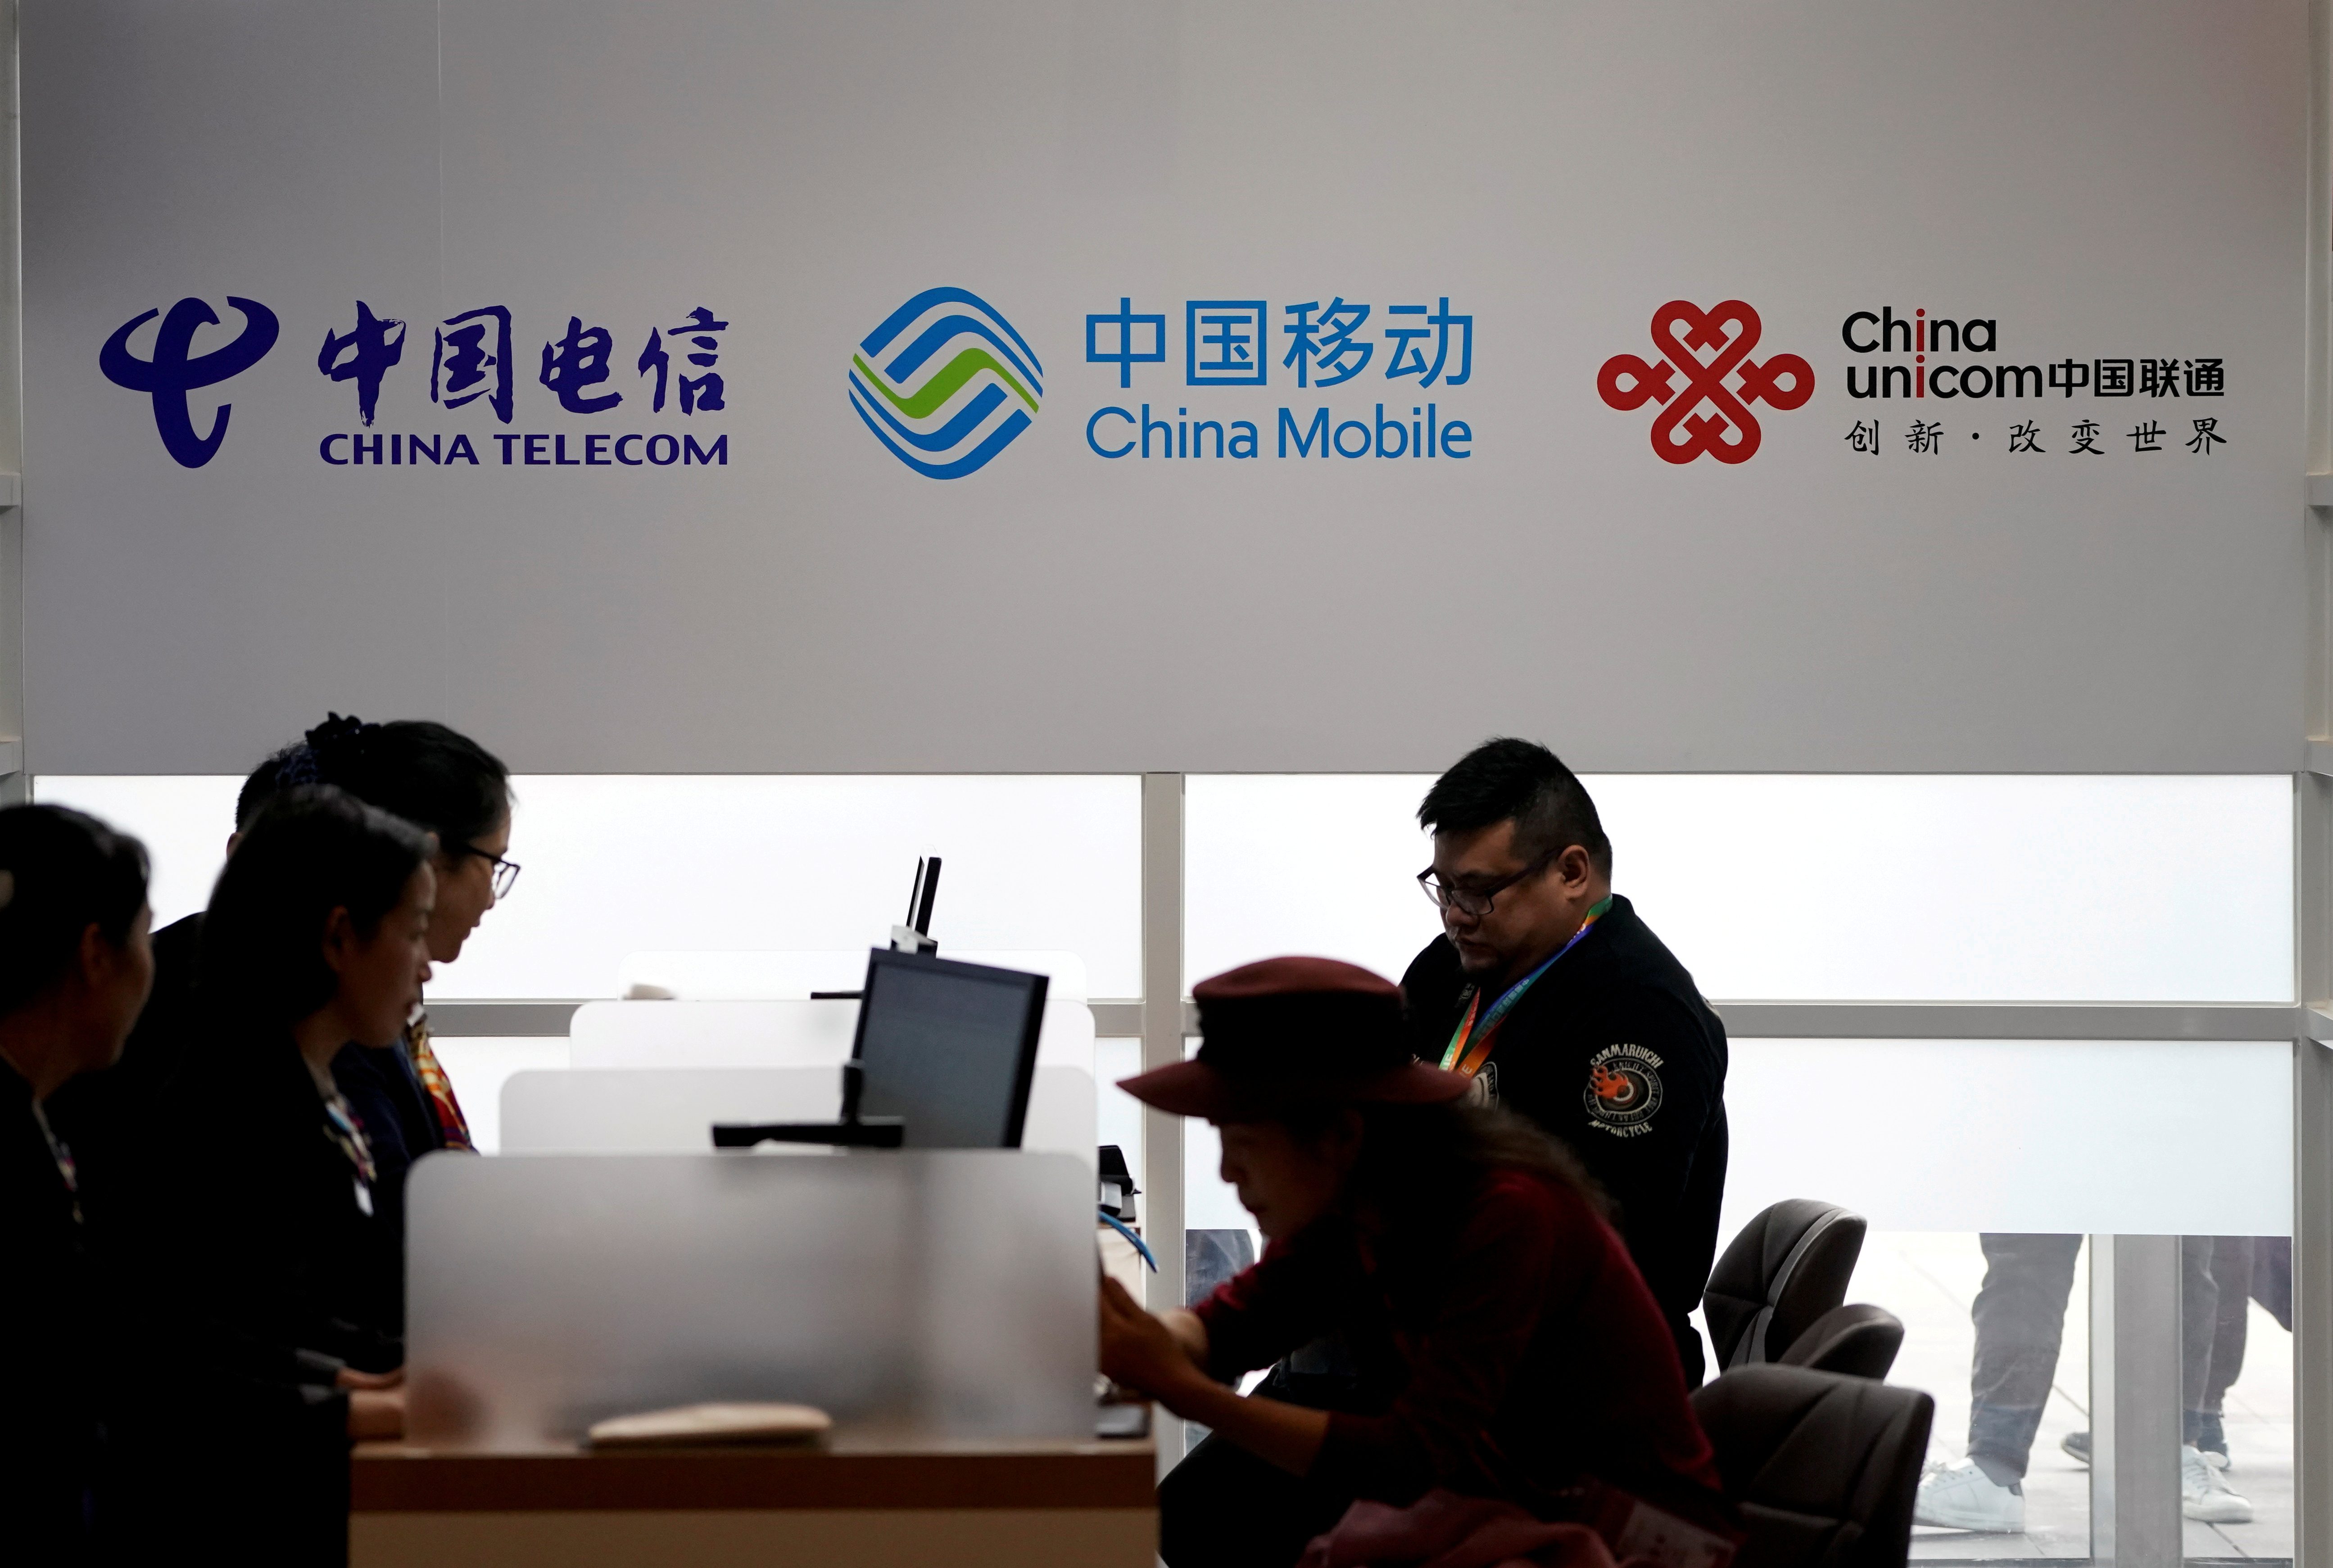 In sudden U-turn, NYSE scraps plan to delist 3 Chinese telecom firms